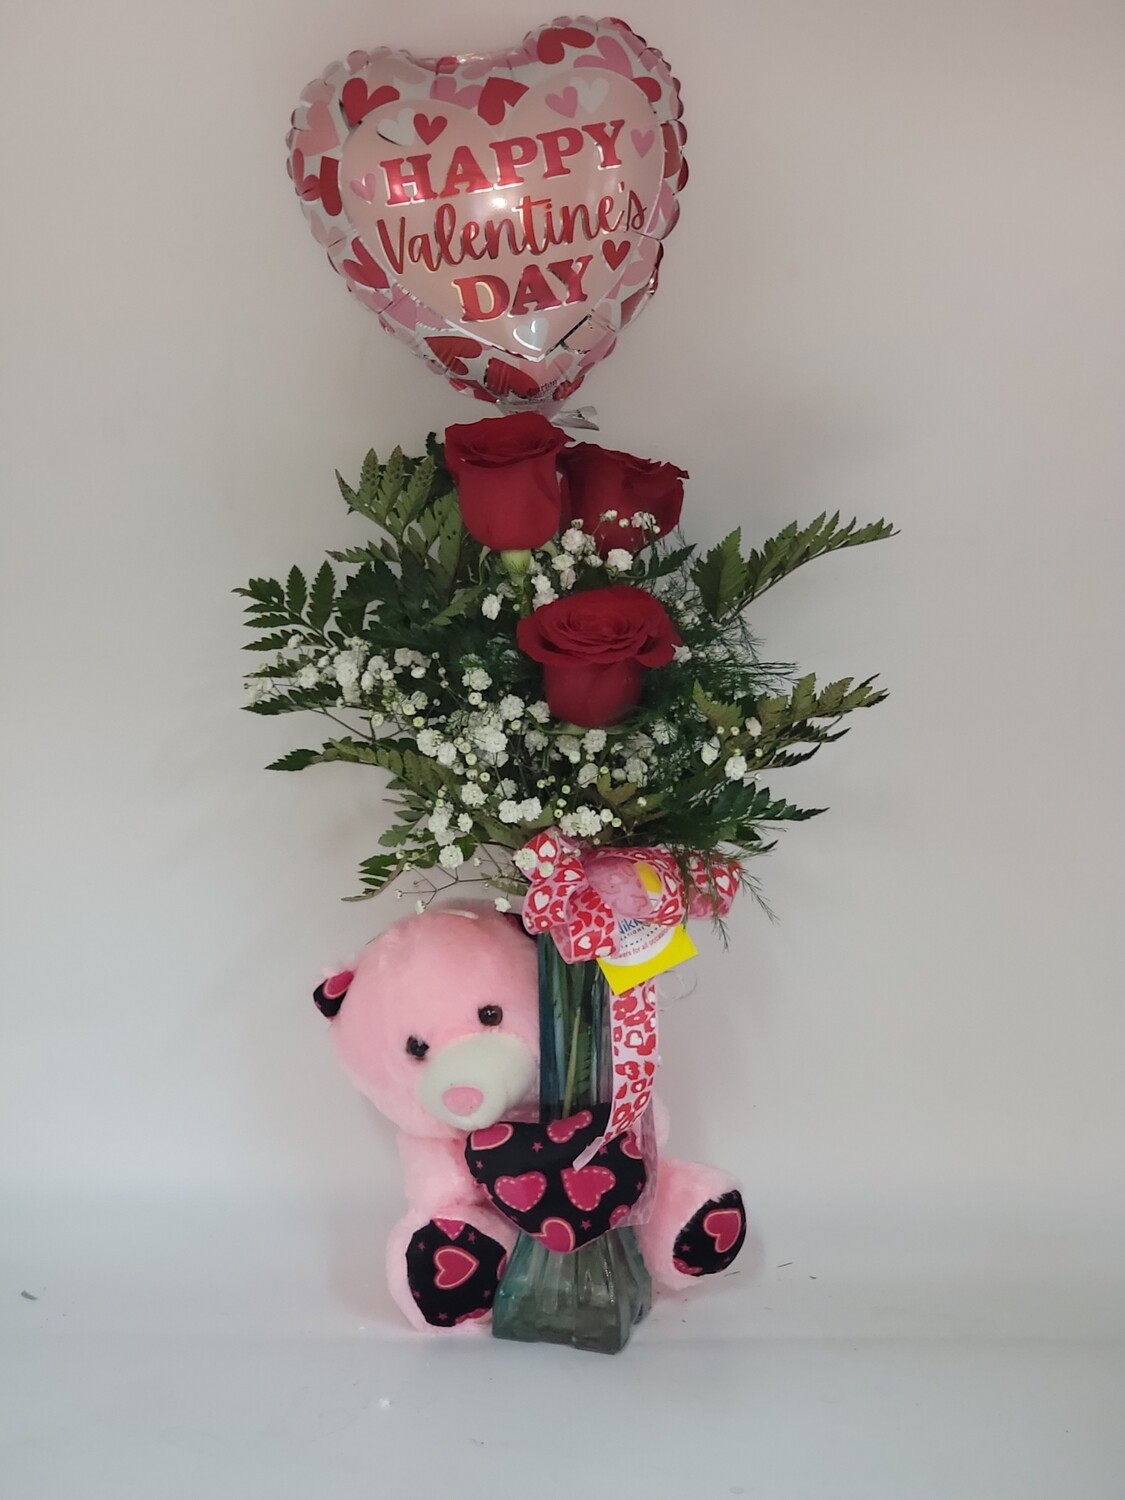 3 Roses in a vase, 1 balloon, small teddy